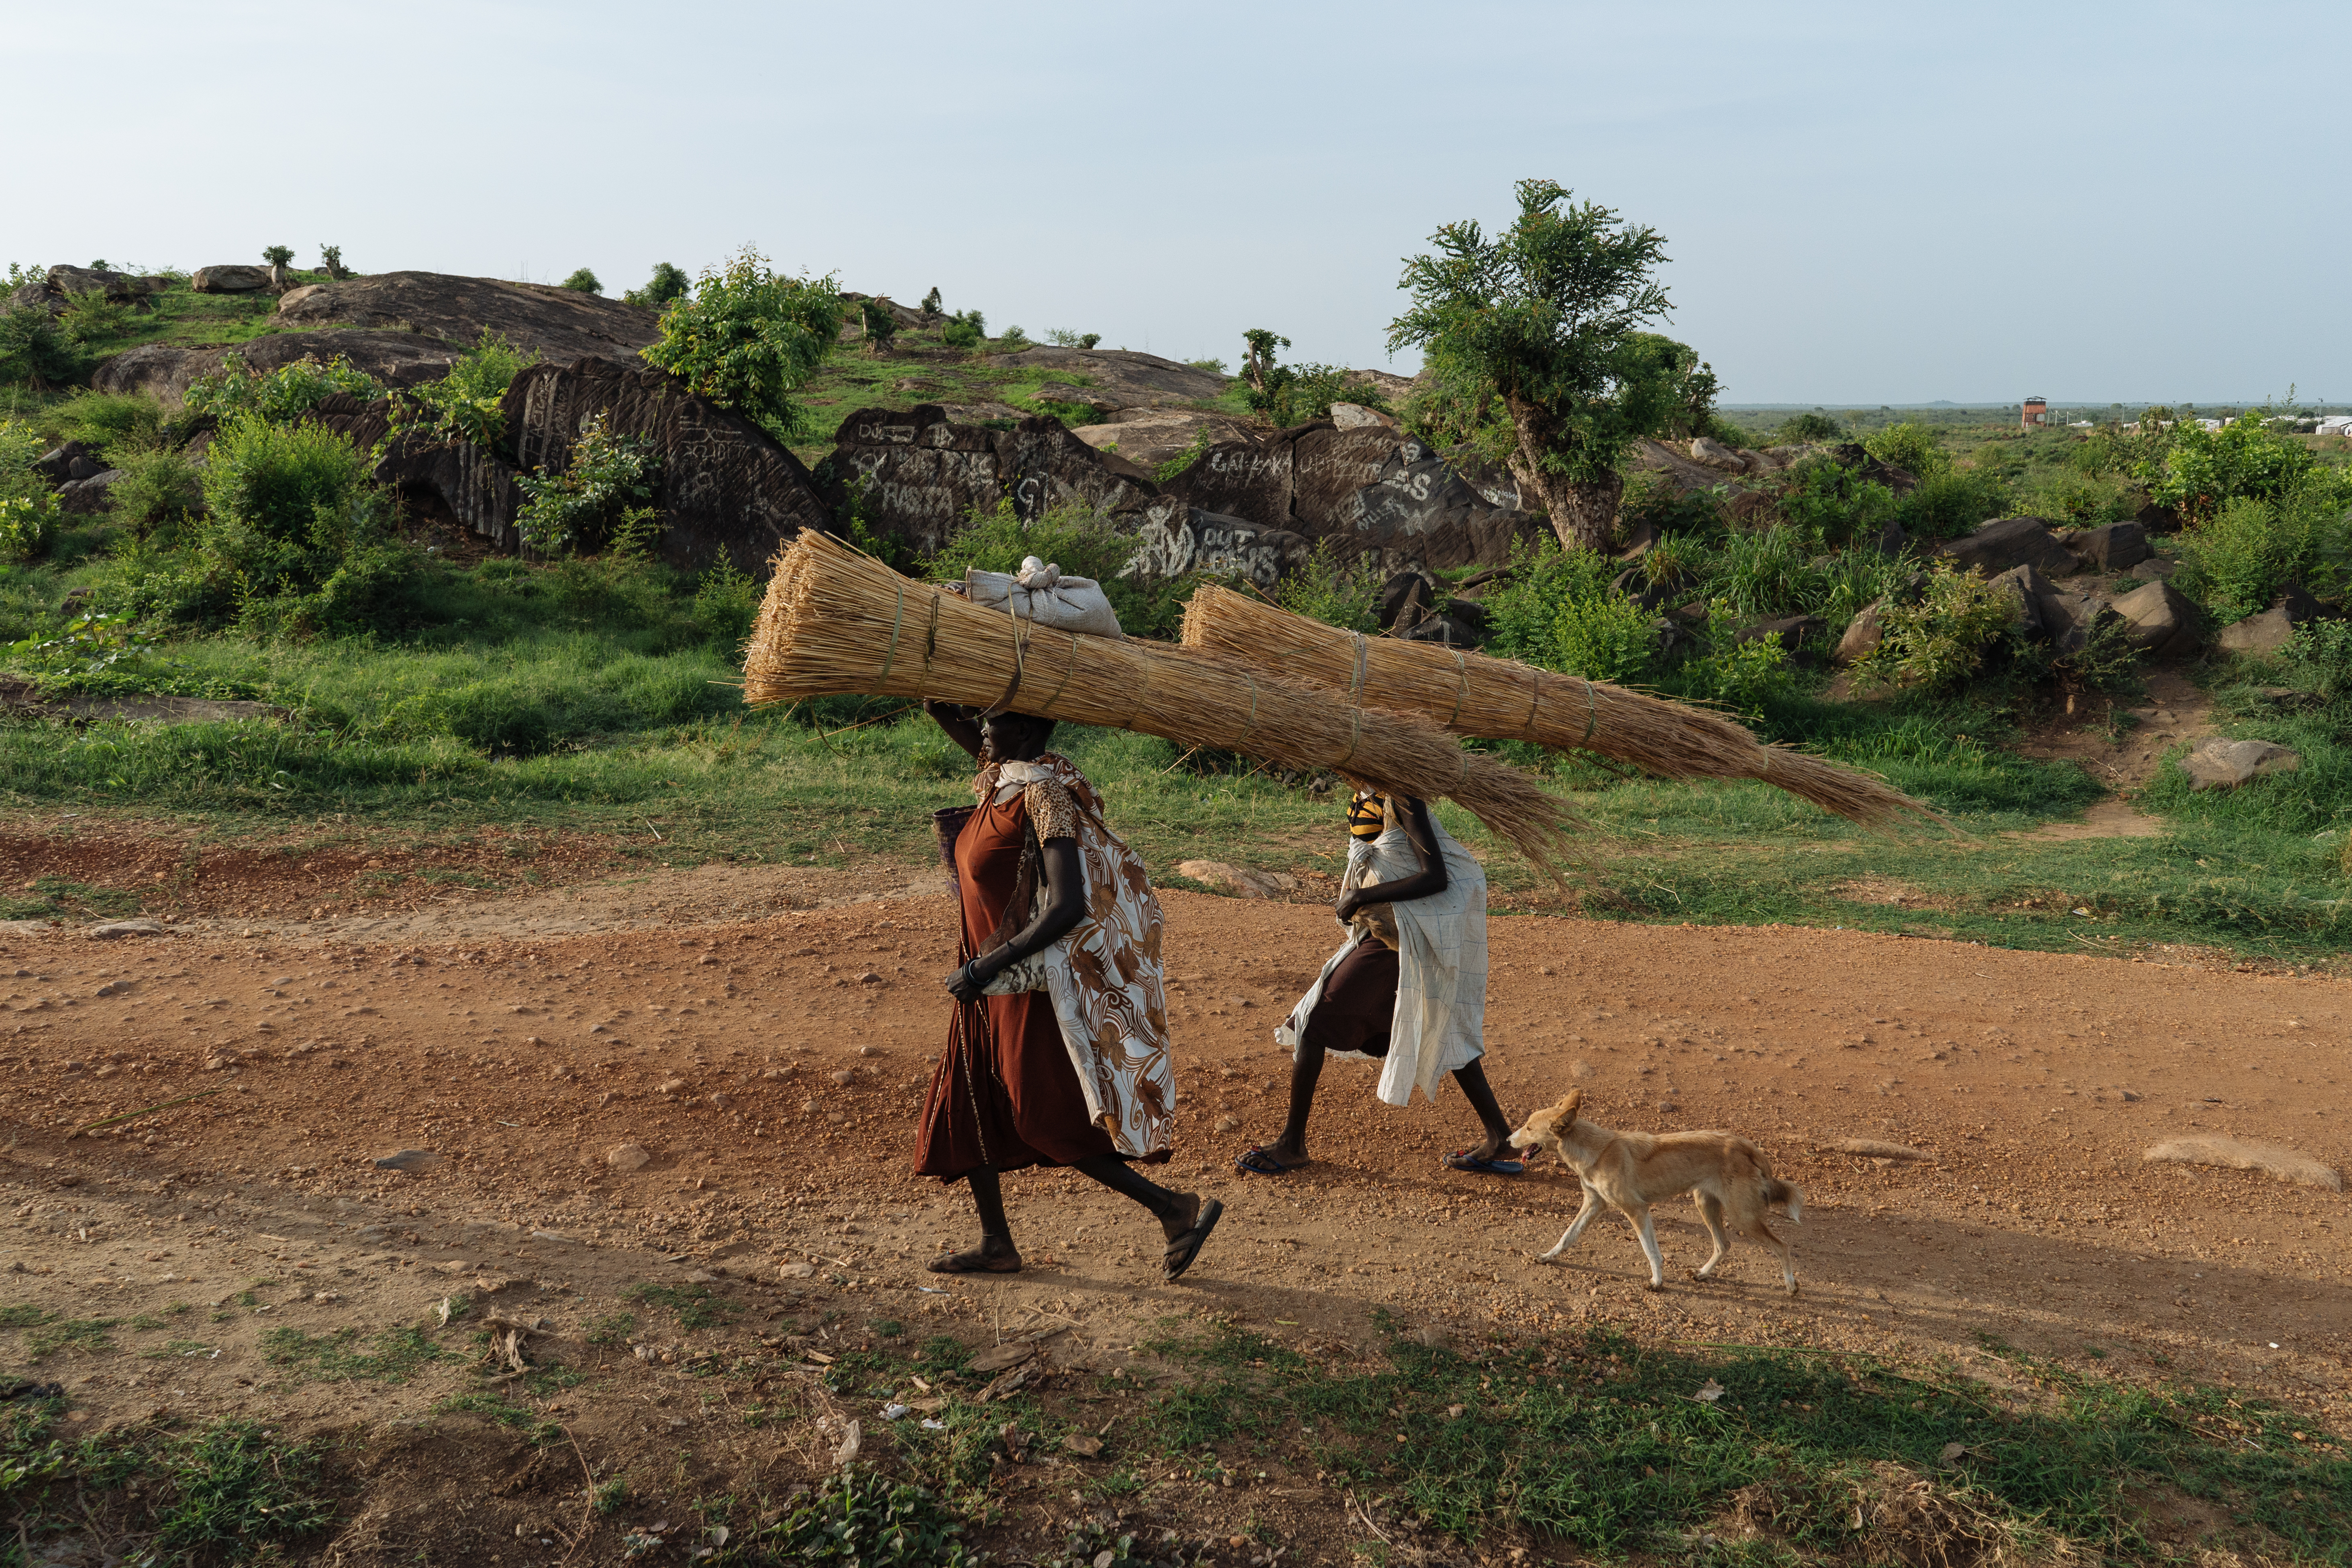 Women return home to the camp after collecting firewood.